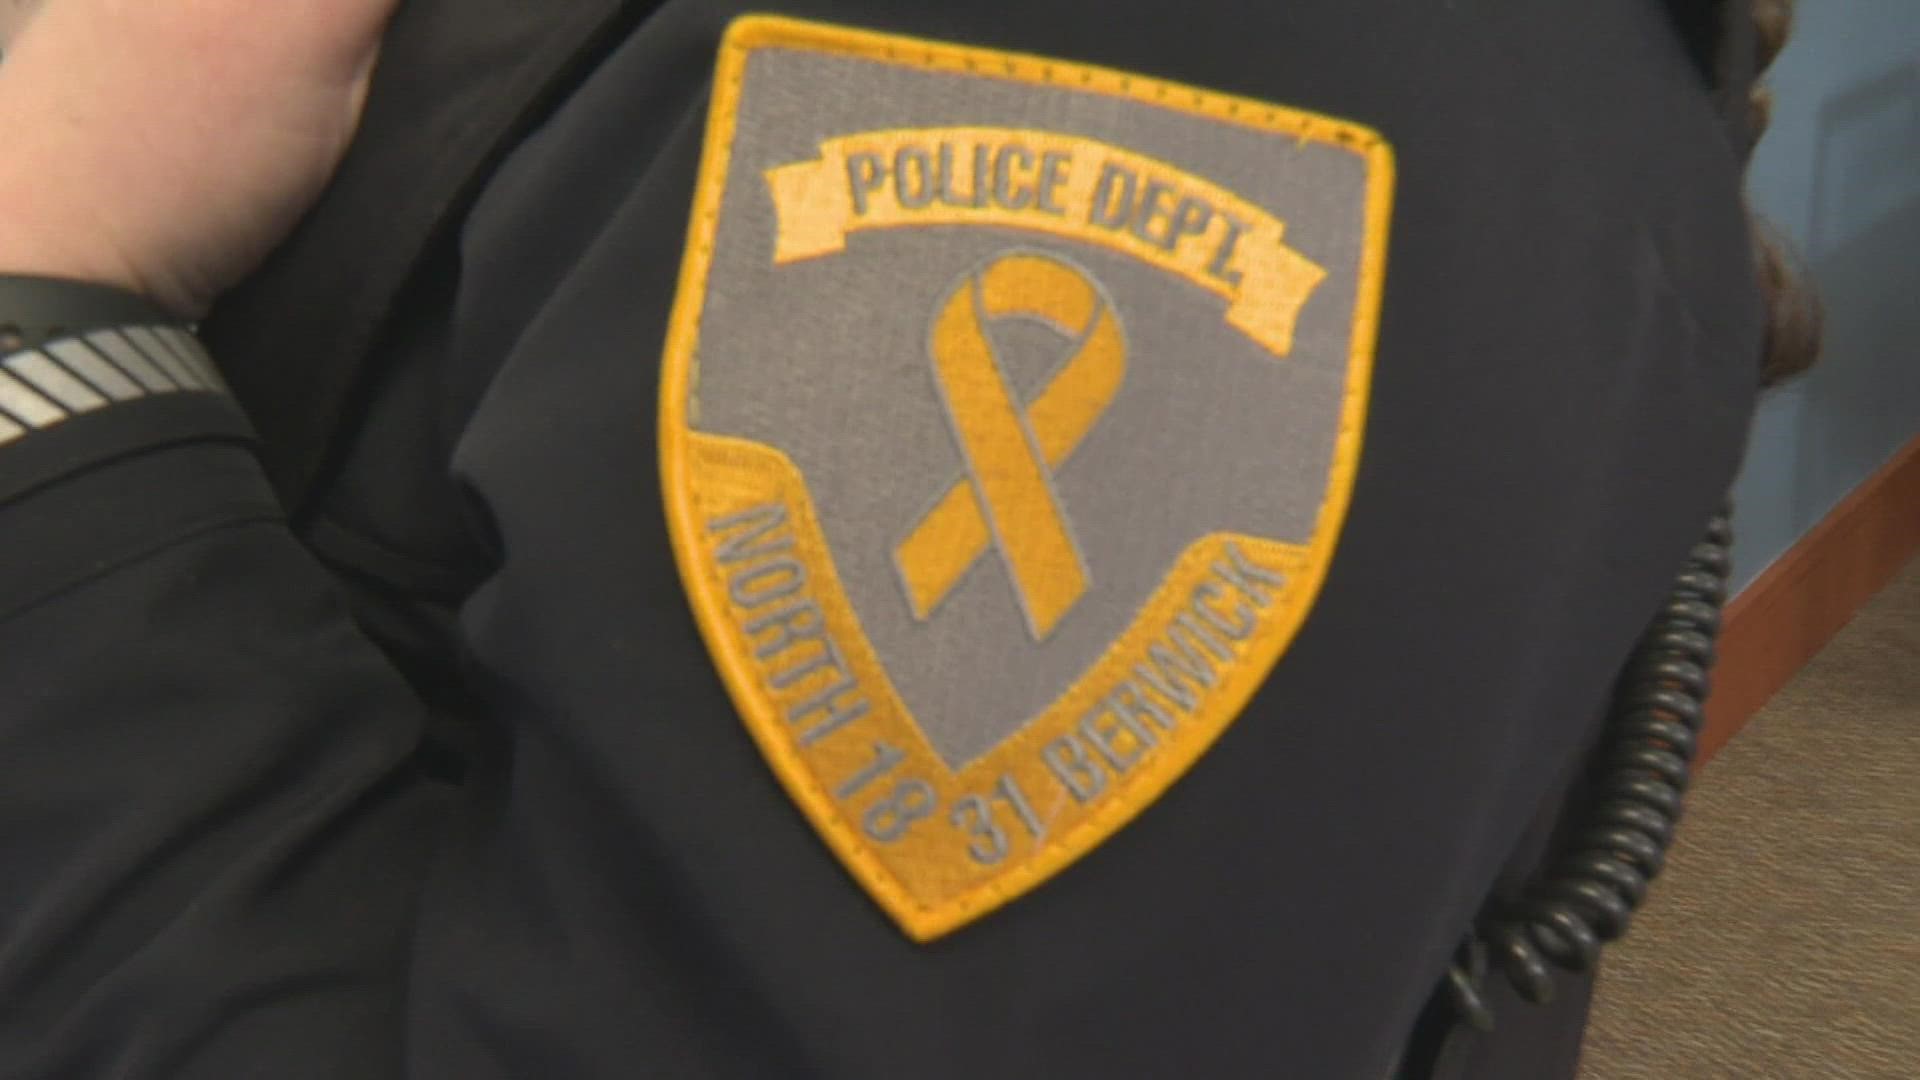 Throughout the month, the police department will be wearing gold patch to raise money and awareness for childhood cancer.